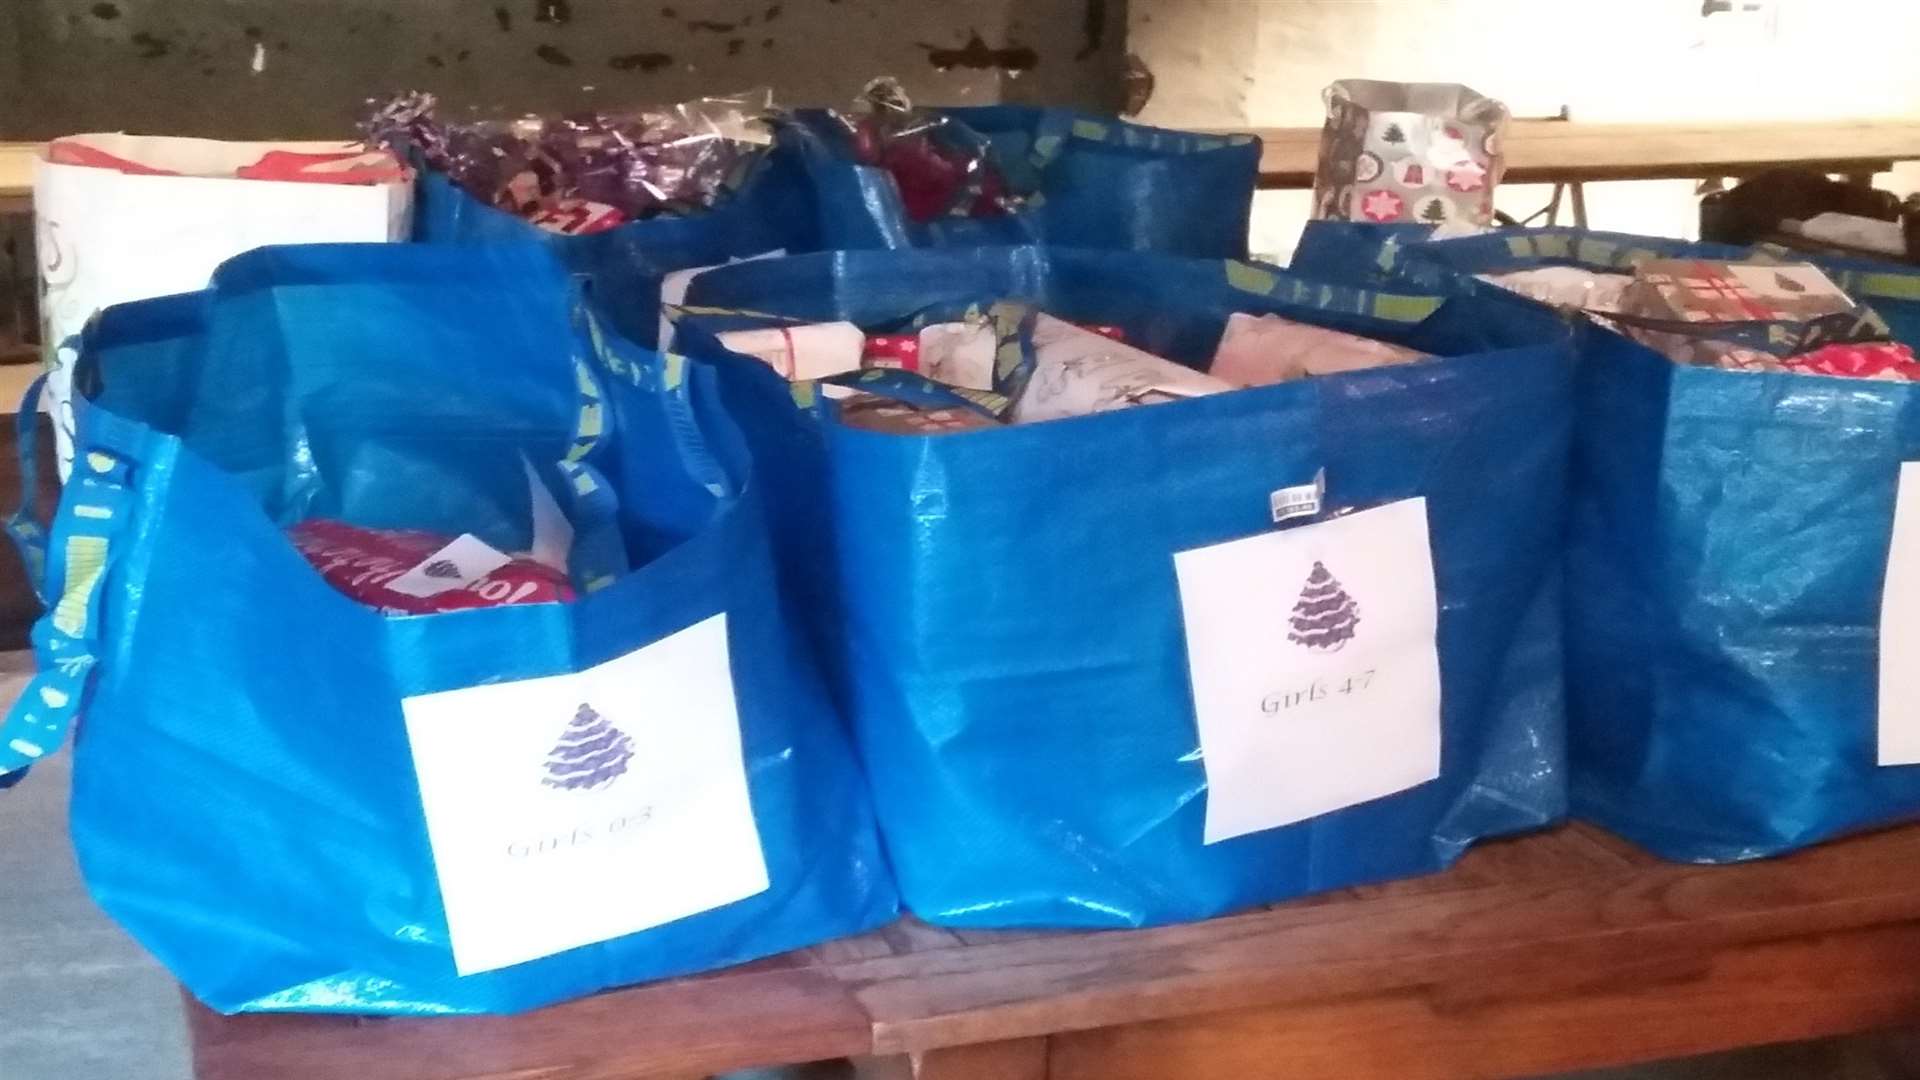 The presents donated by Tenterden people